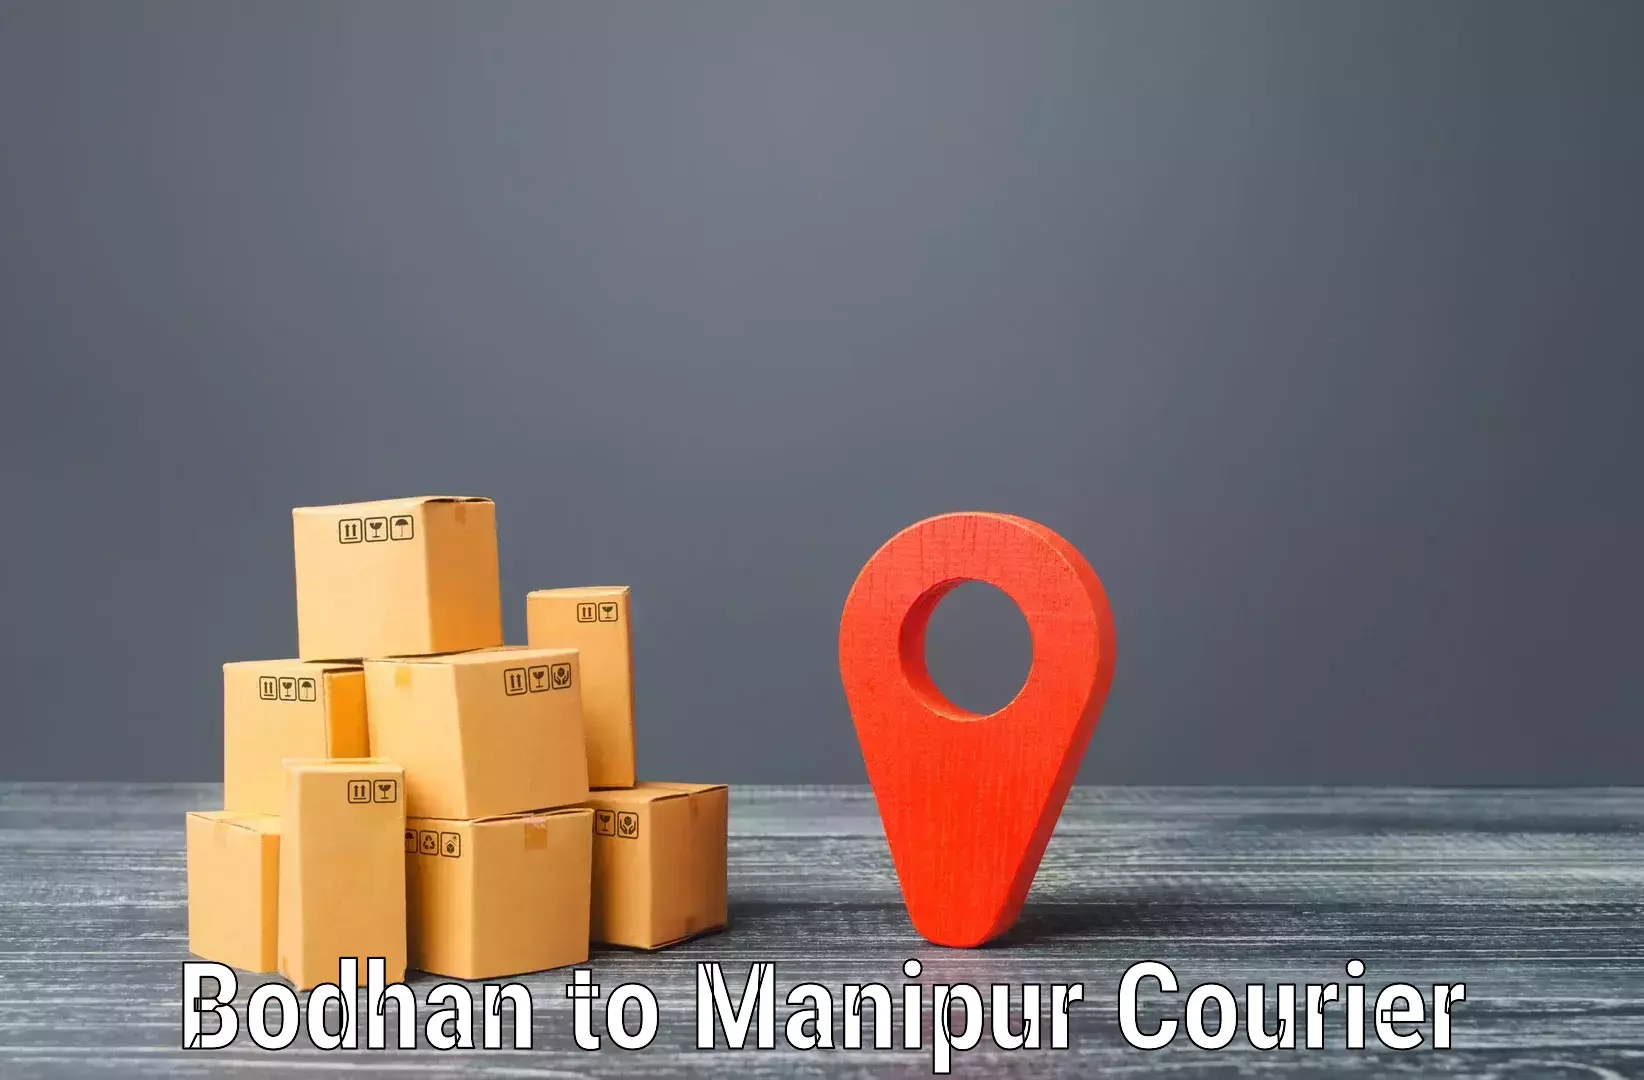 Quality courier partnerships Bodhan to Moirang